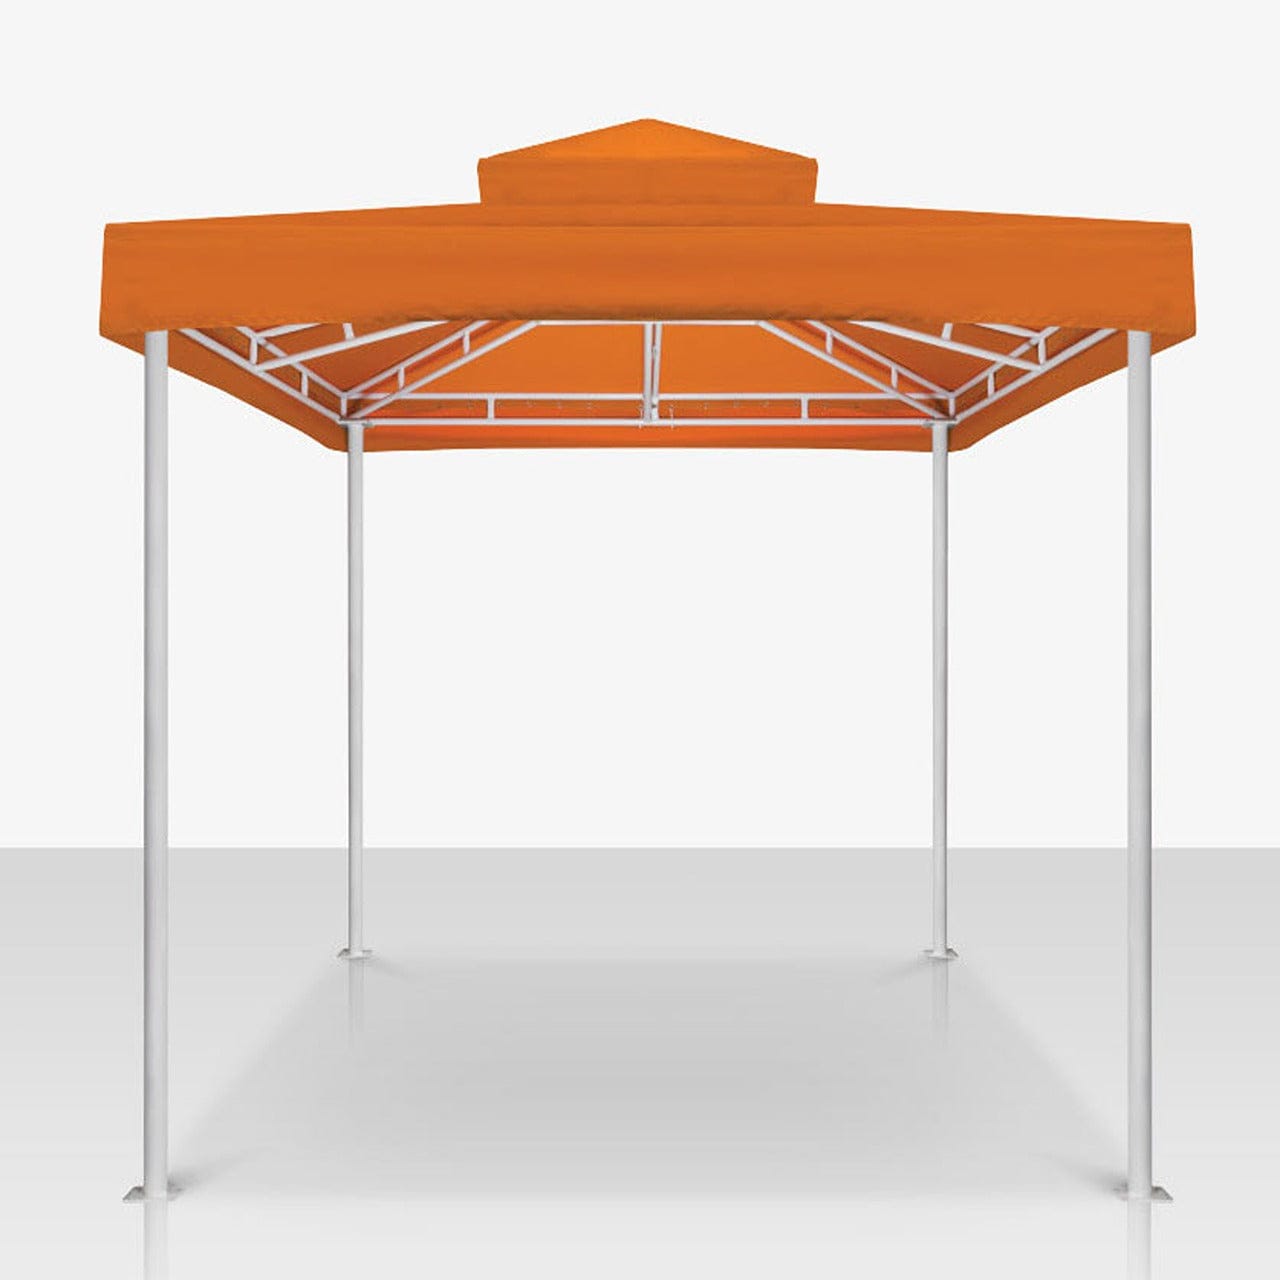 OASIS Vented Roof Cabana